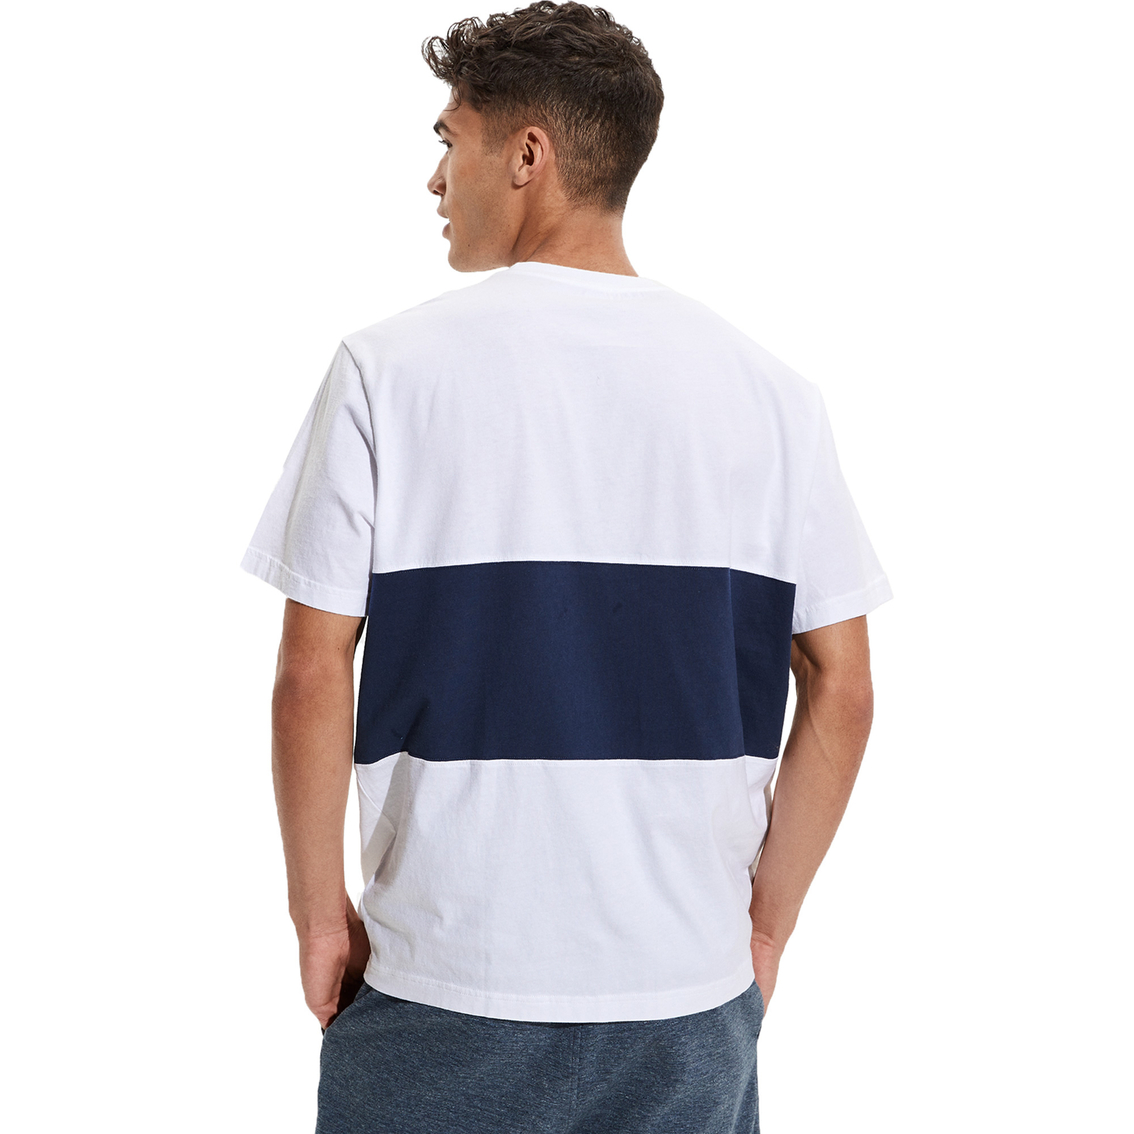 American Eagle Super Soft Striped Graphic Tee - Image 2 of 4